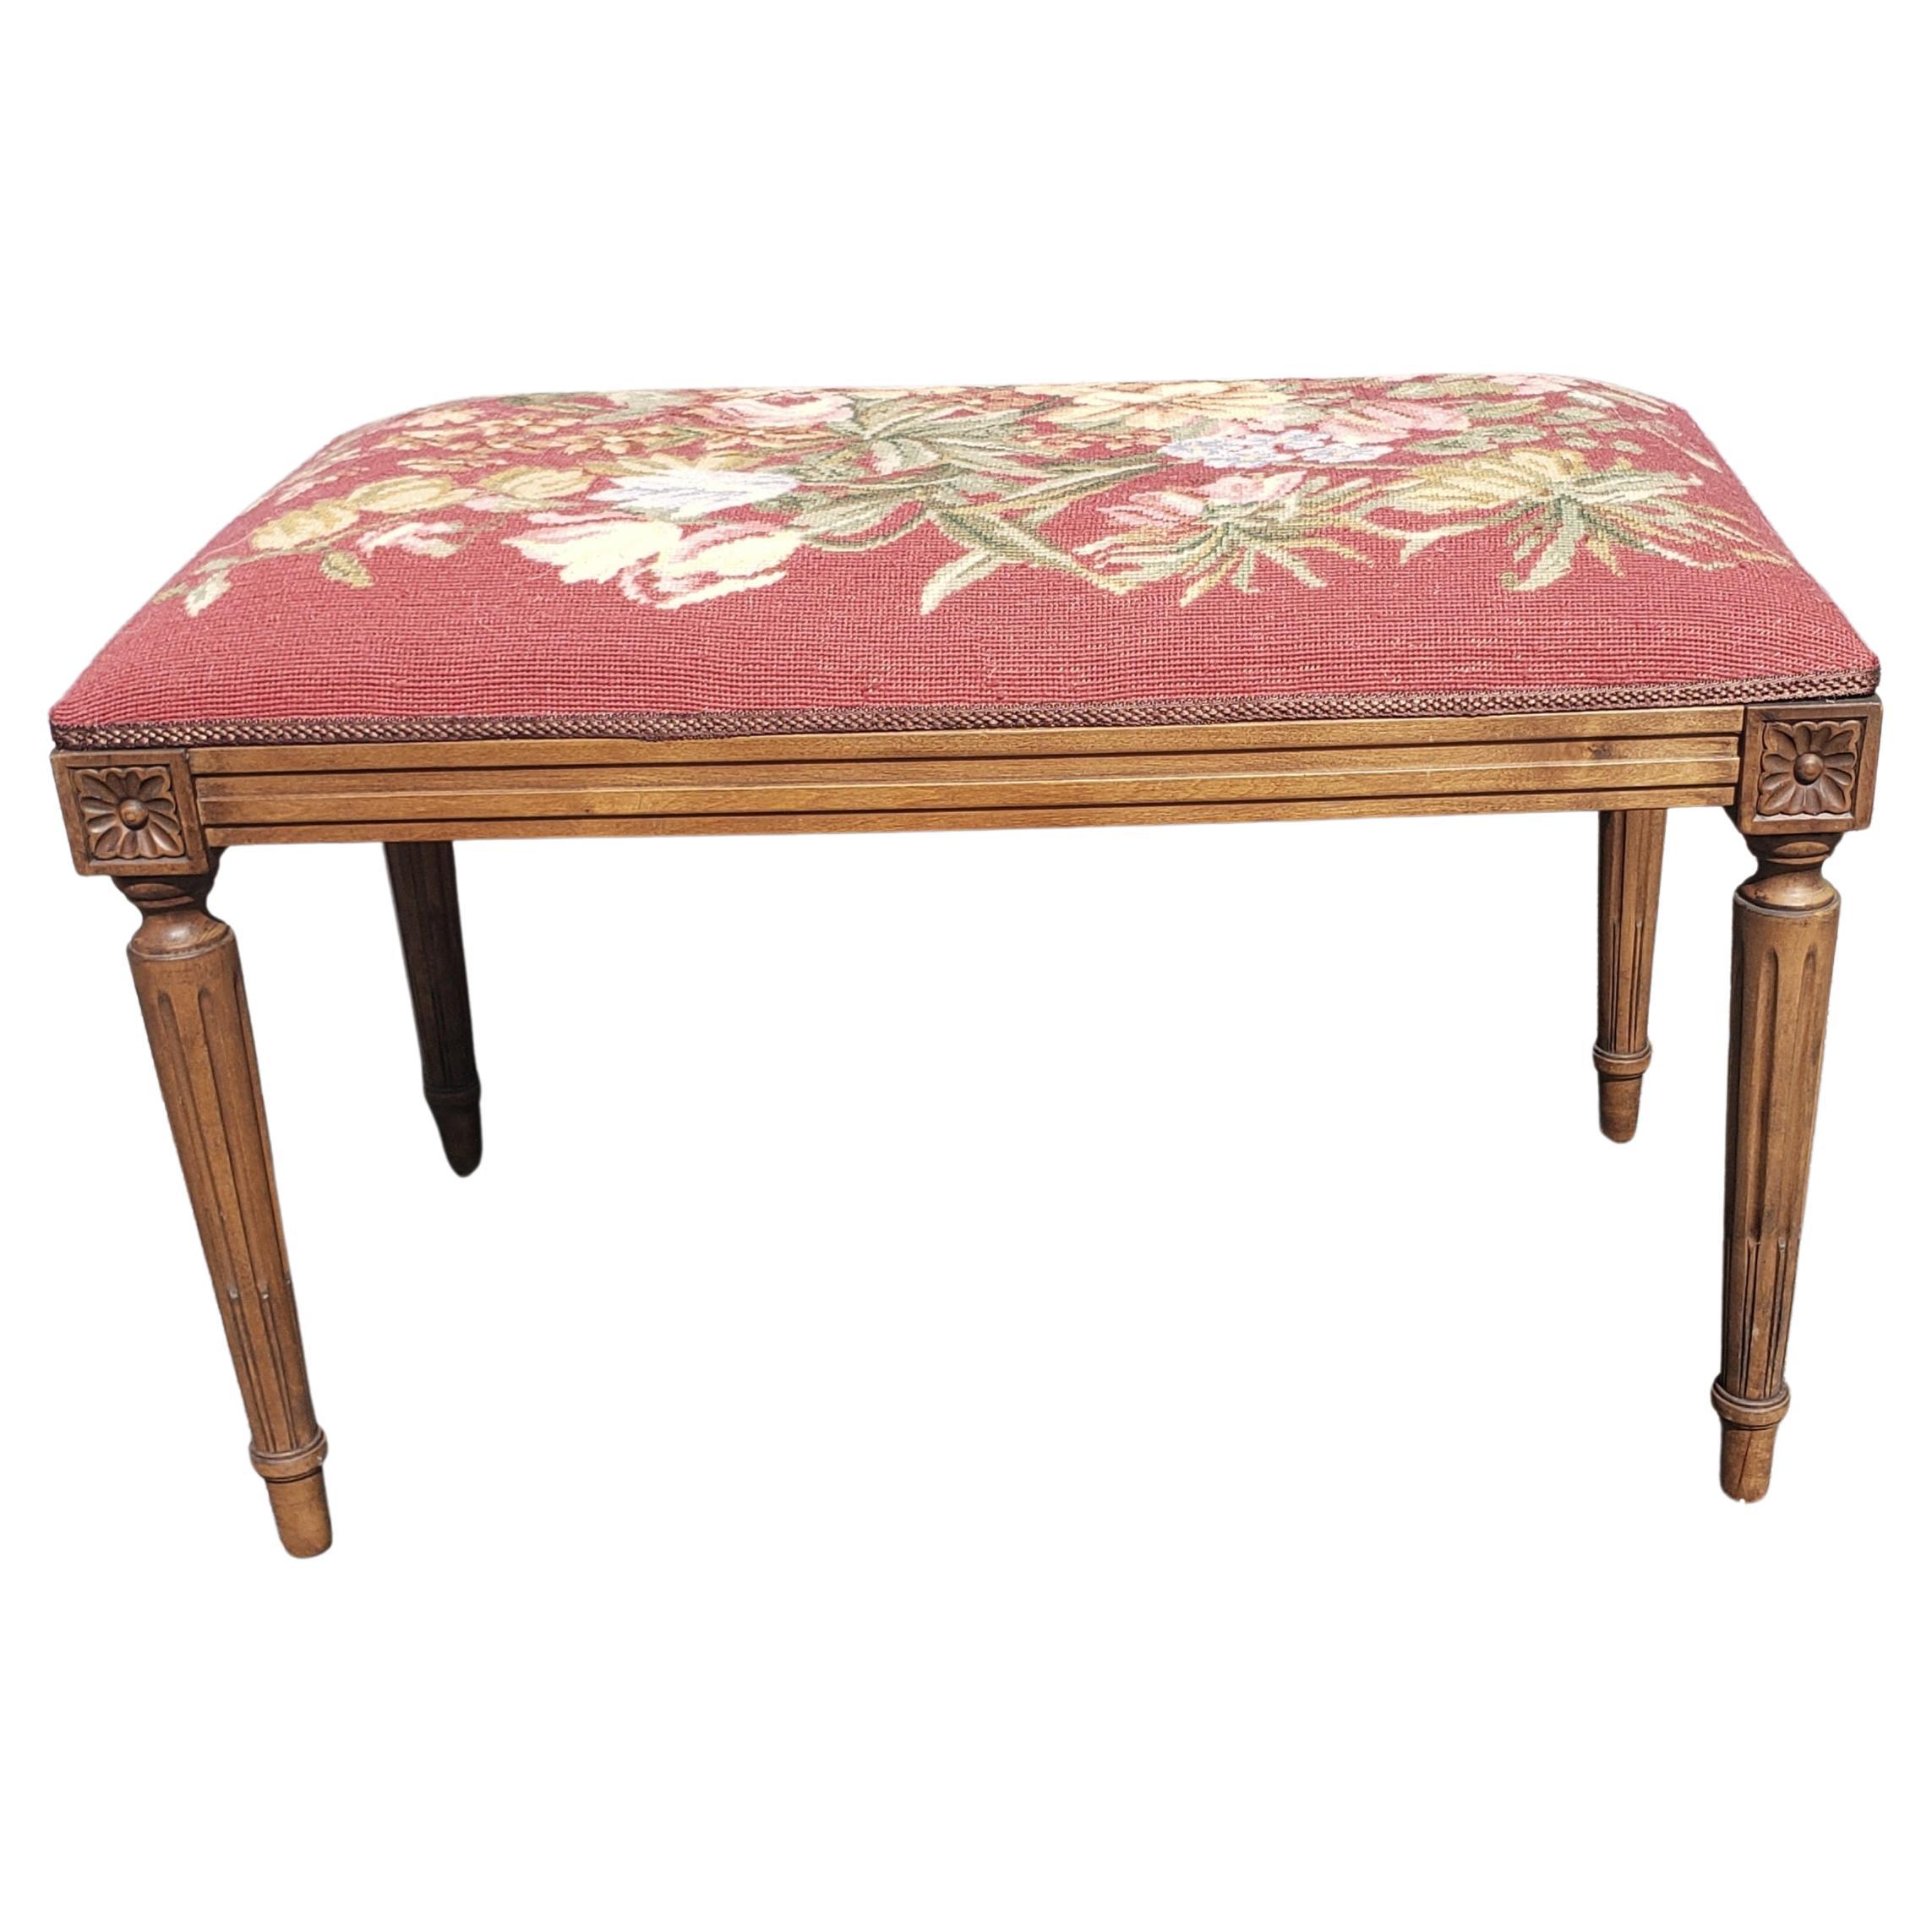 20th Century Louis XVI Style Walnut and Needlepoint Upholstered Tabouret Bench For Sale